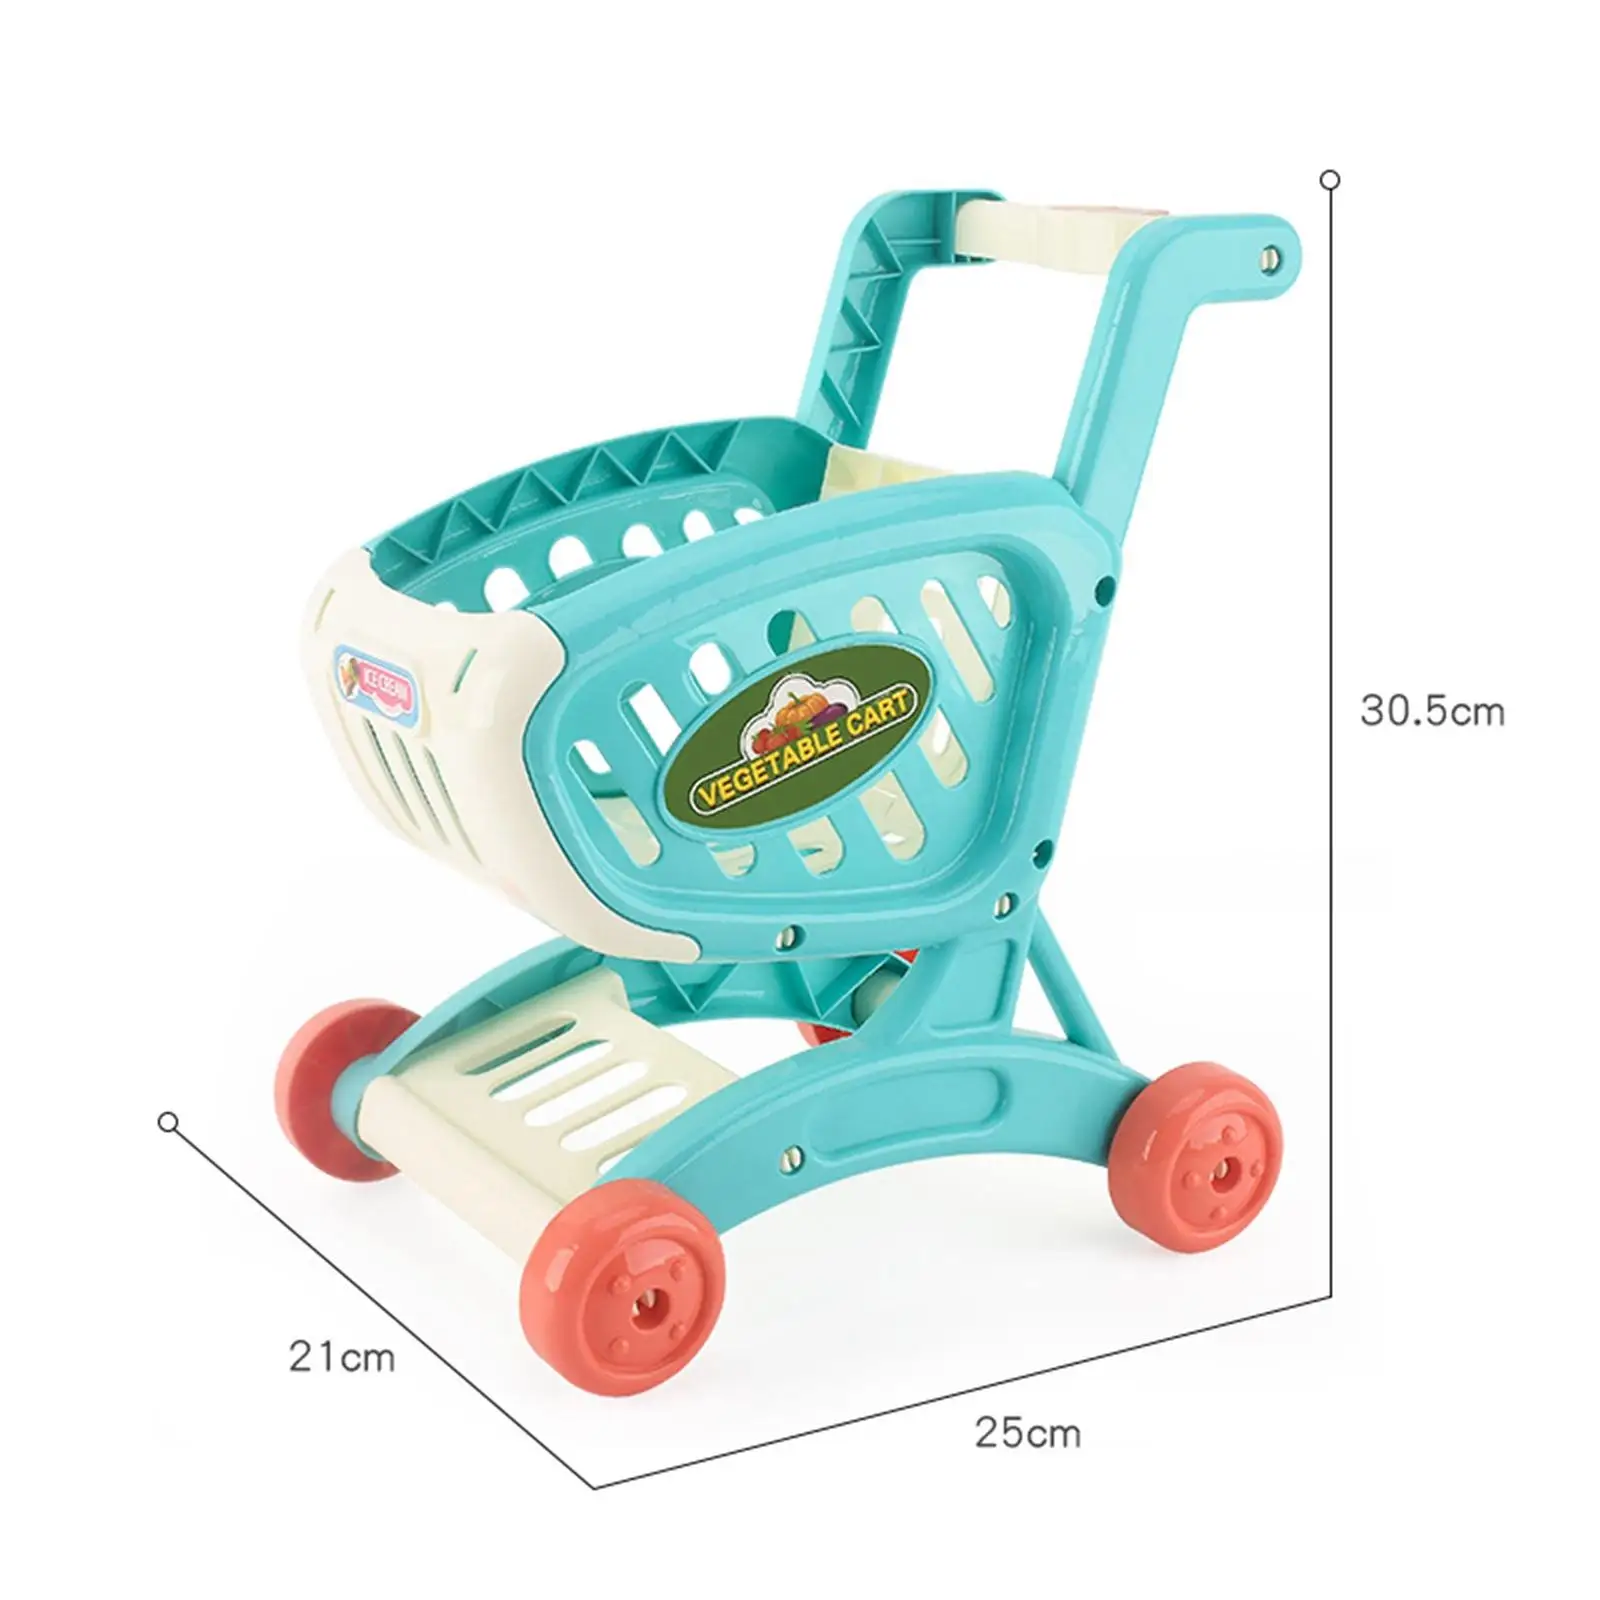 Mini Shopping Cart Toy Funny for Girls and Boys Preschool Ages 3 and up